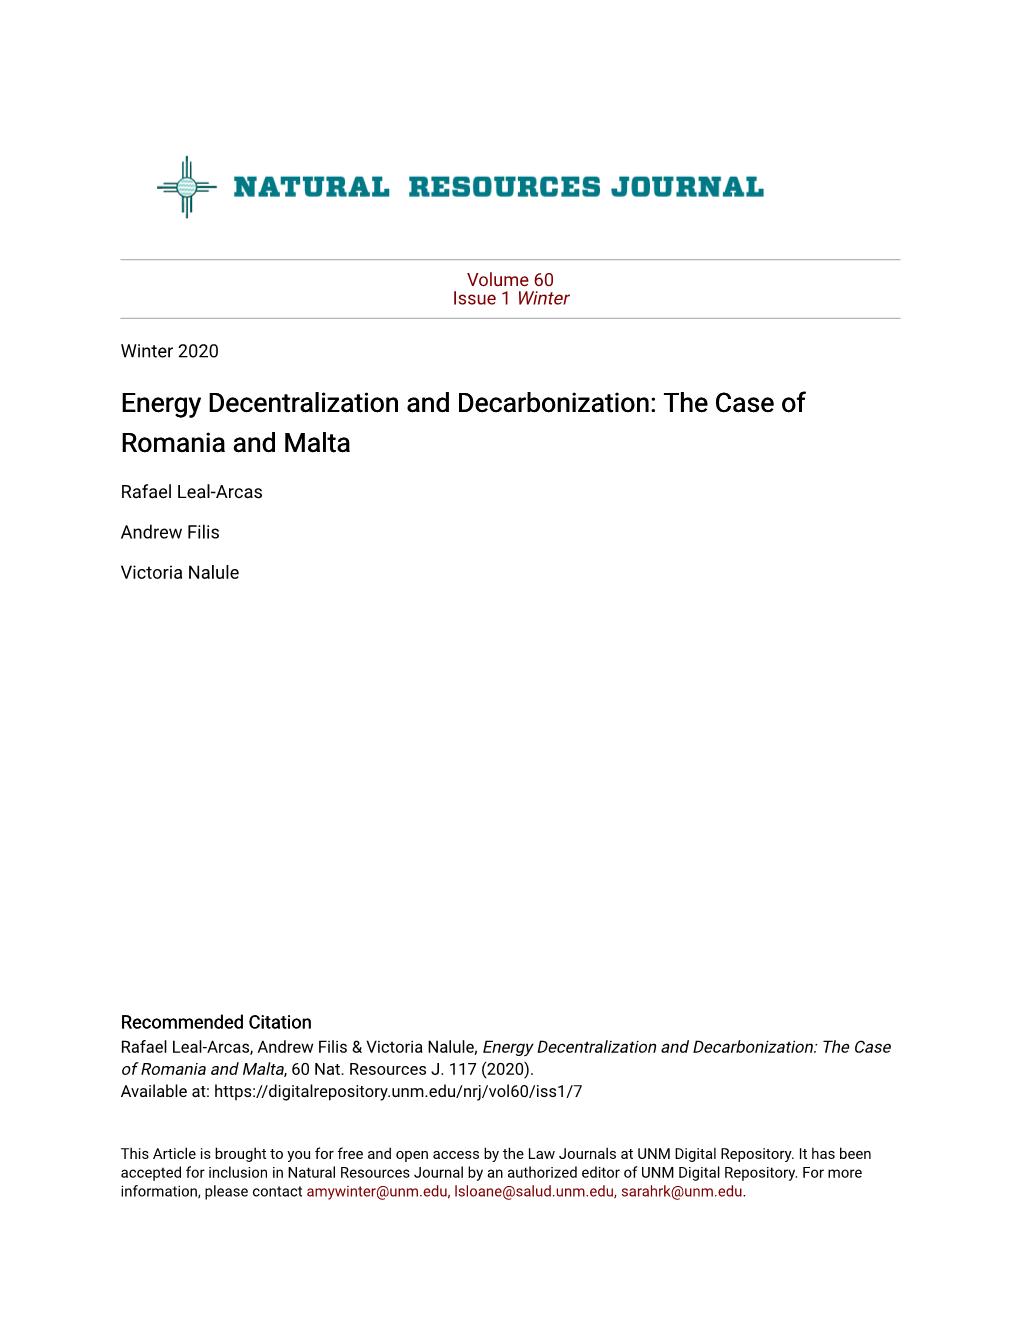 Energy Decentralization and Decarbonization: the Case of Romania and Malta